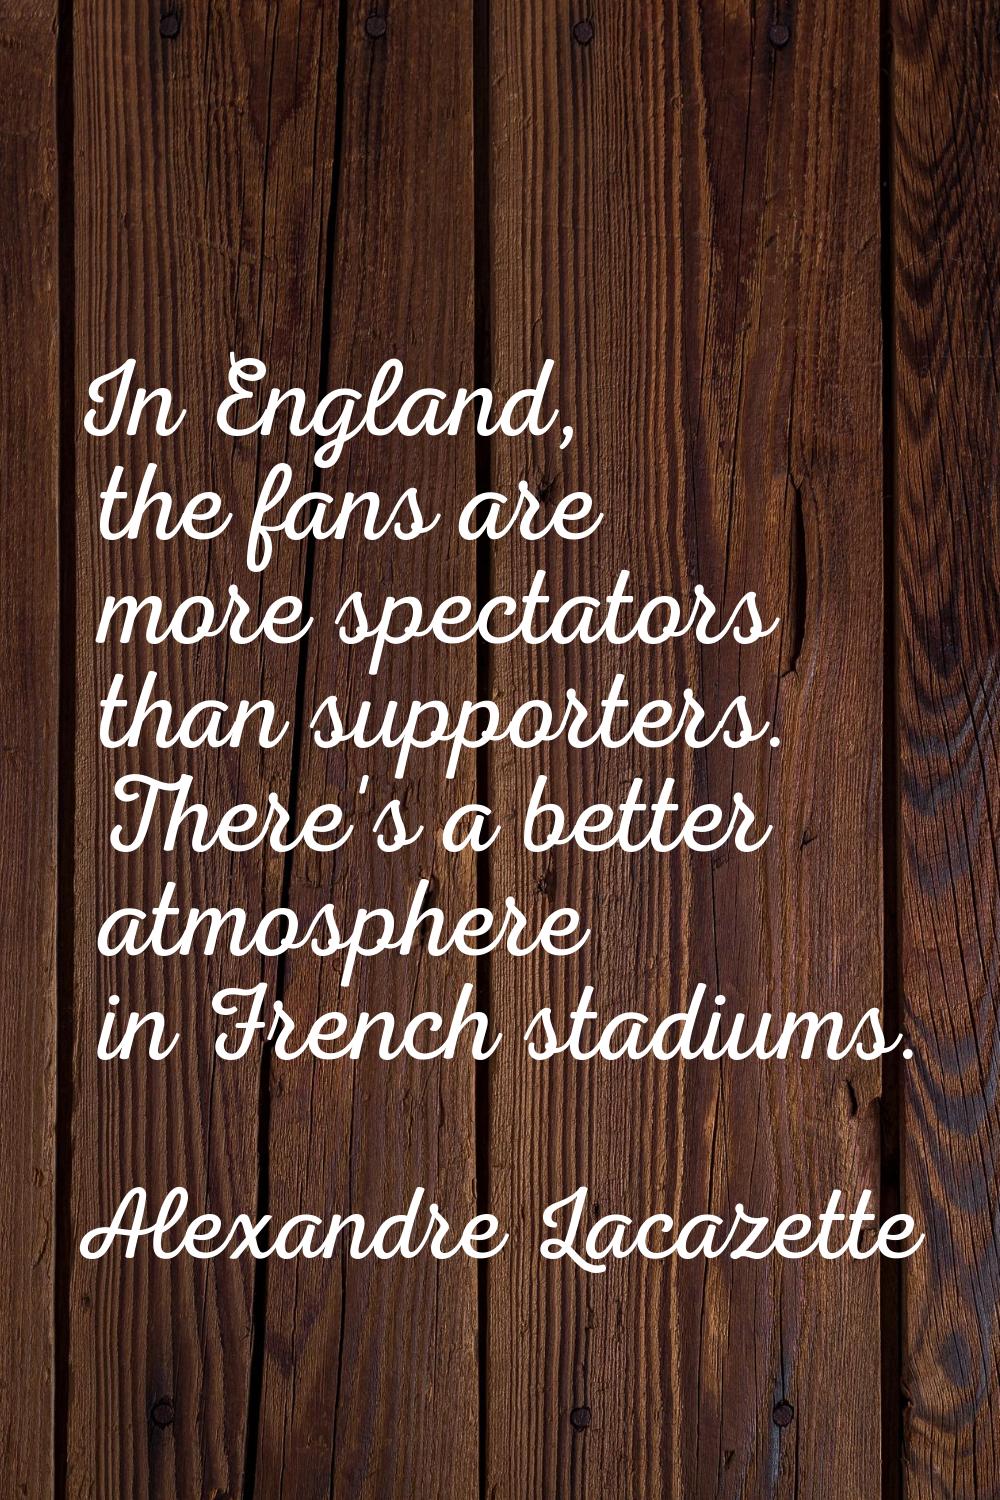 In England, the fans are more spectators than supporters. There's a better atmosphere in French sta